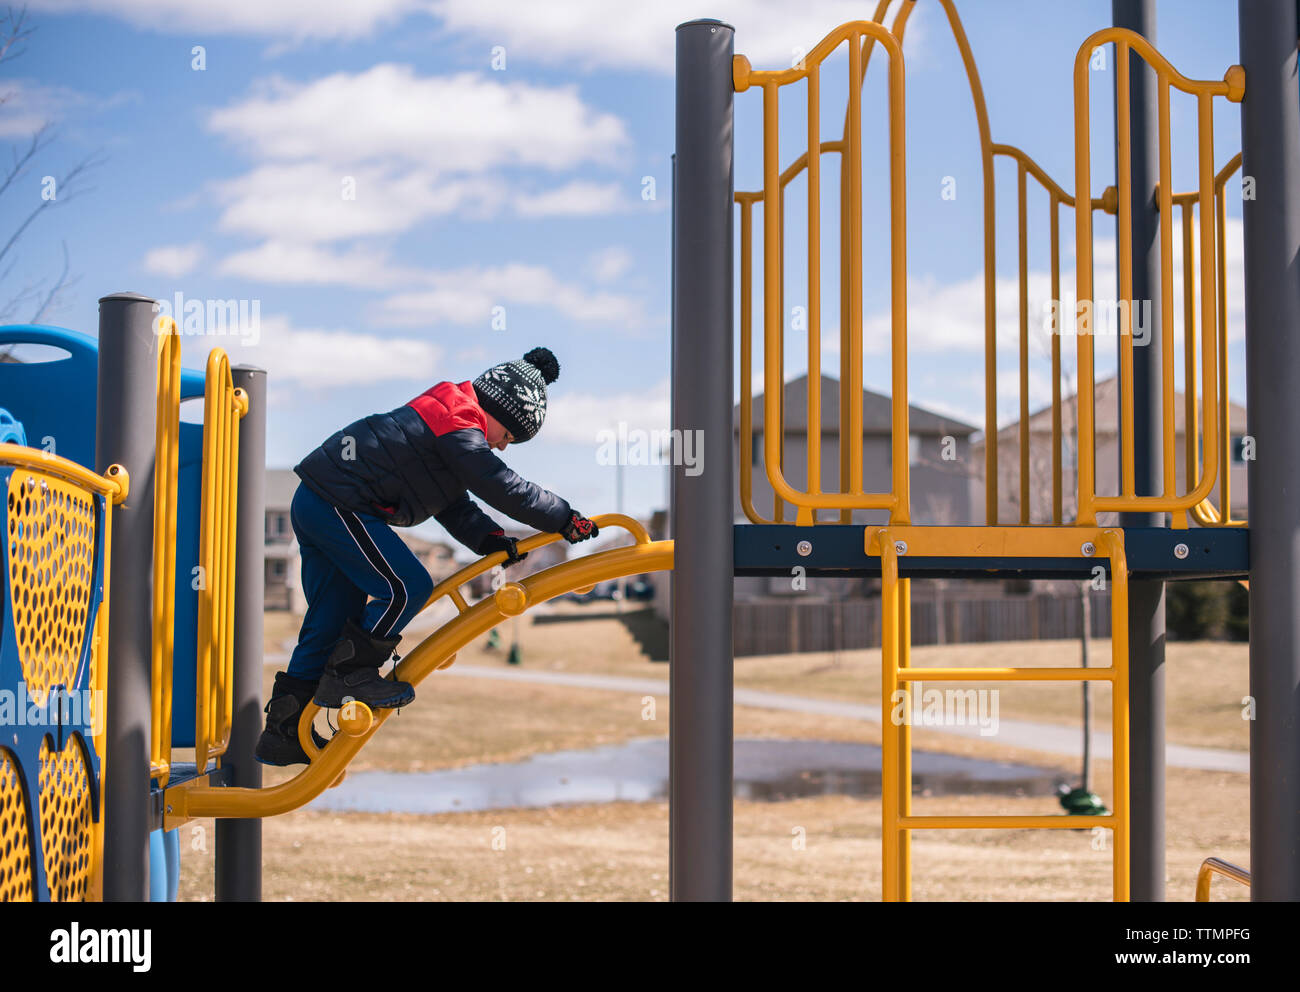 Side view of boy climbing ladder against sky at playground Stock Photo